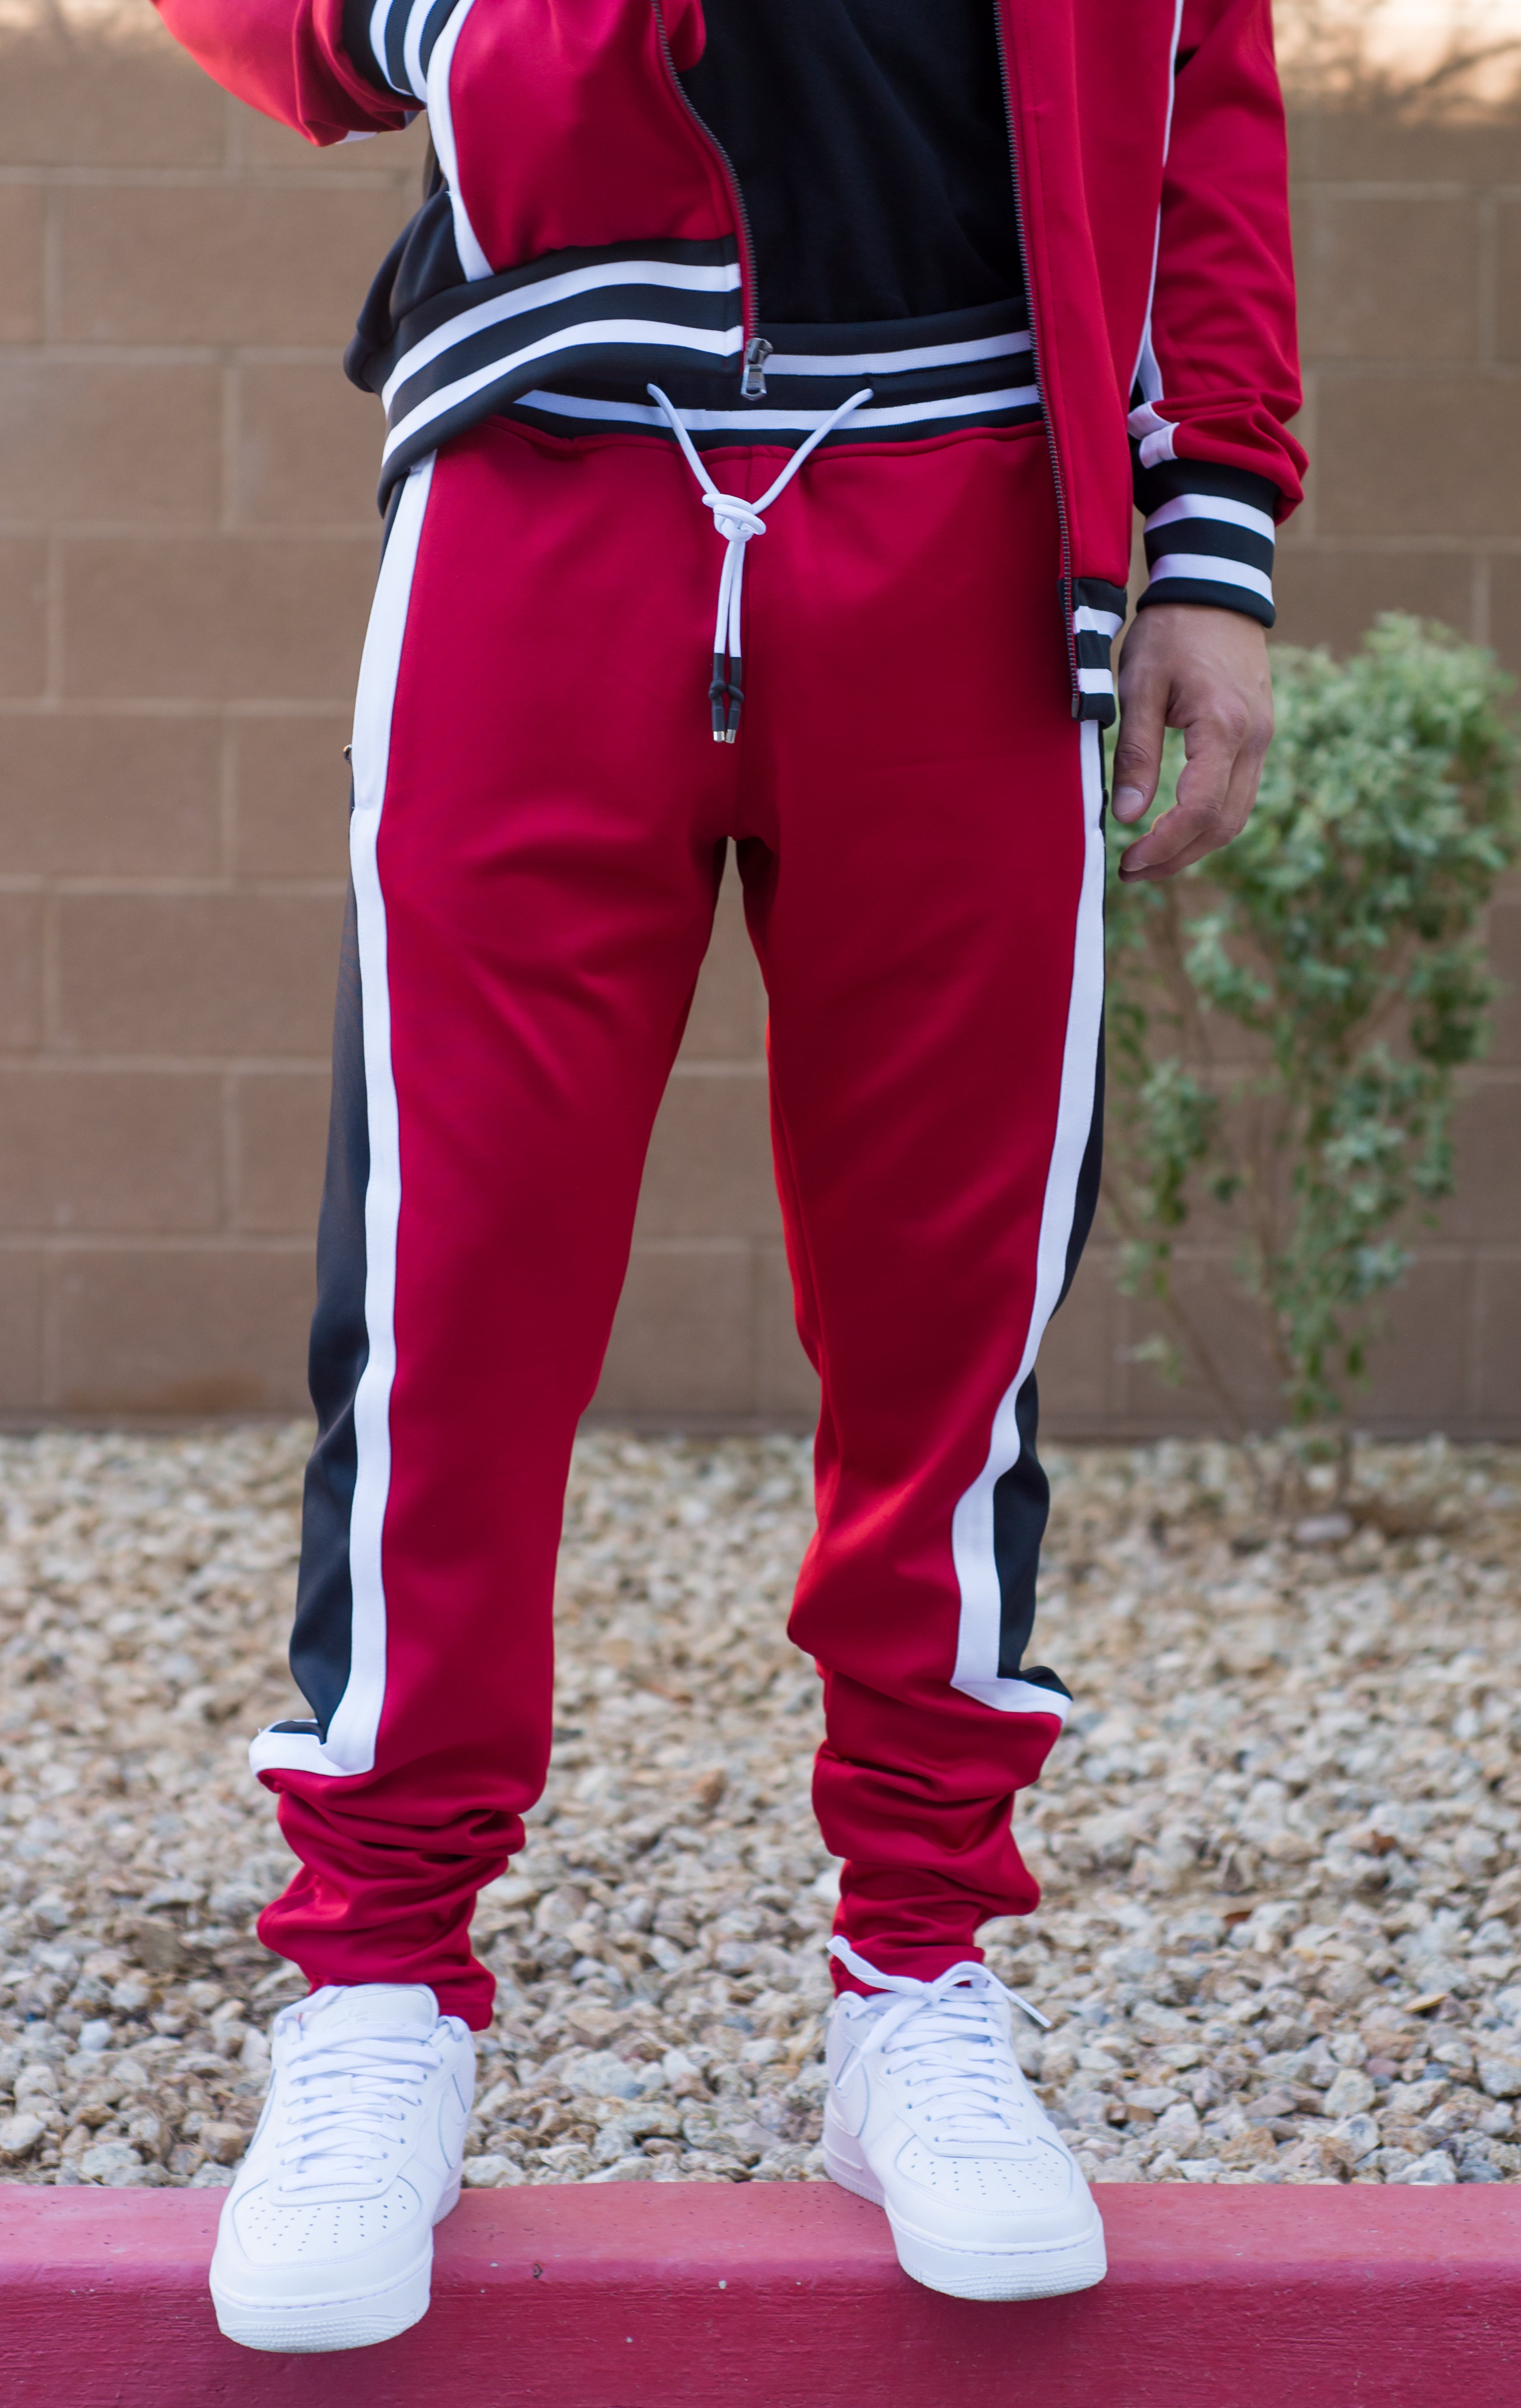 Track suit bottom: Tapered-leg track pant silhouette, rubber dipped drawstrings with metal tips. Dual pockets at sides and zipper gussets at both inner ankle openings.